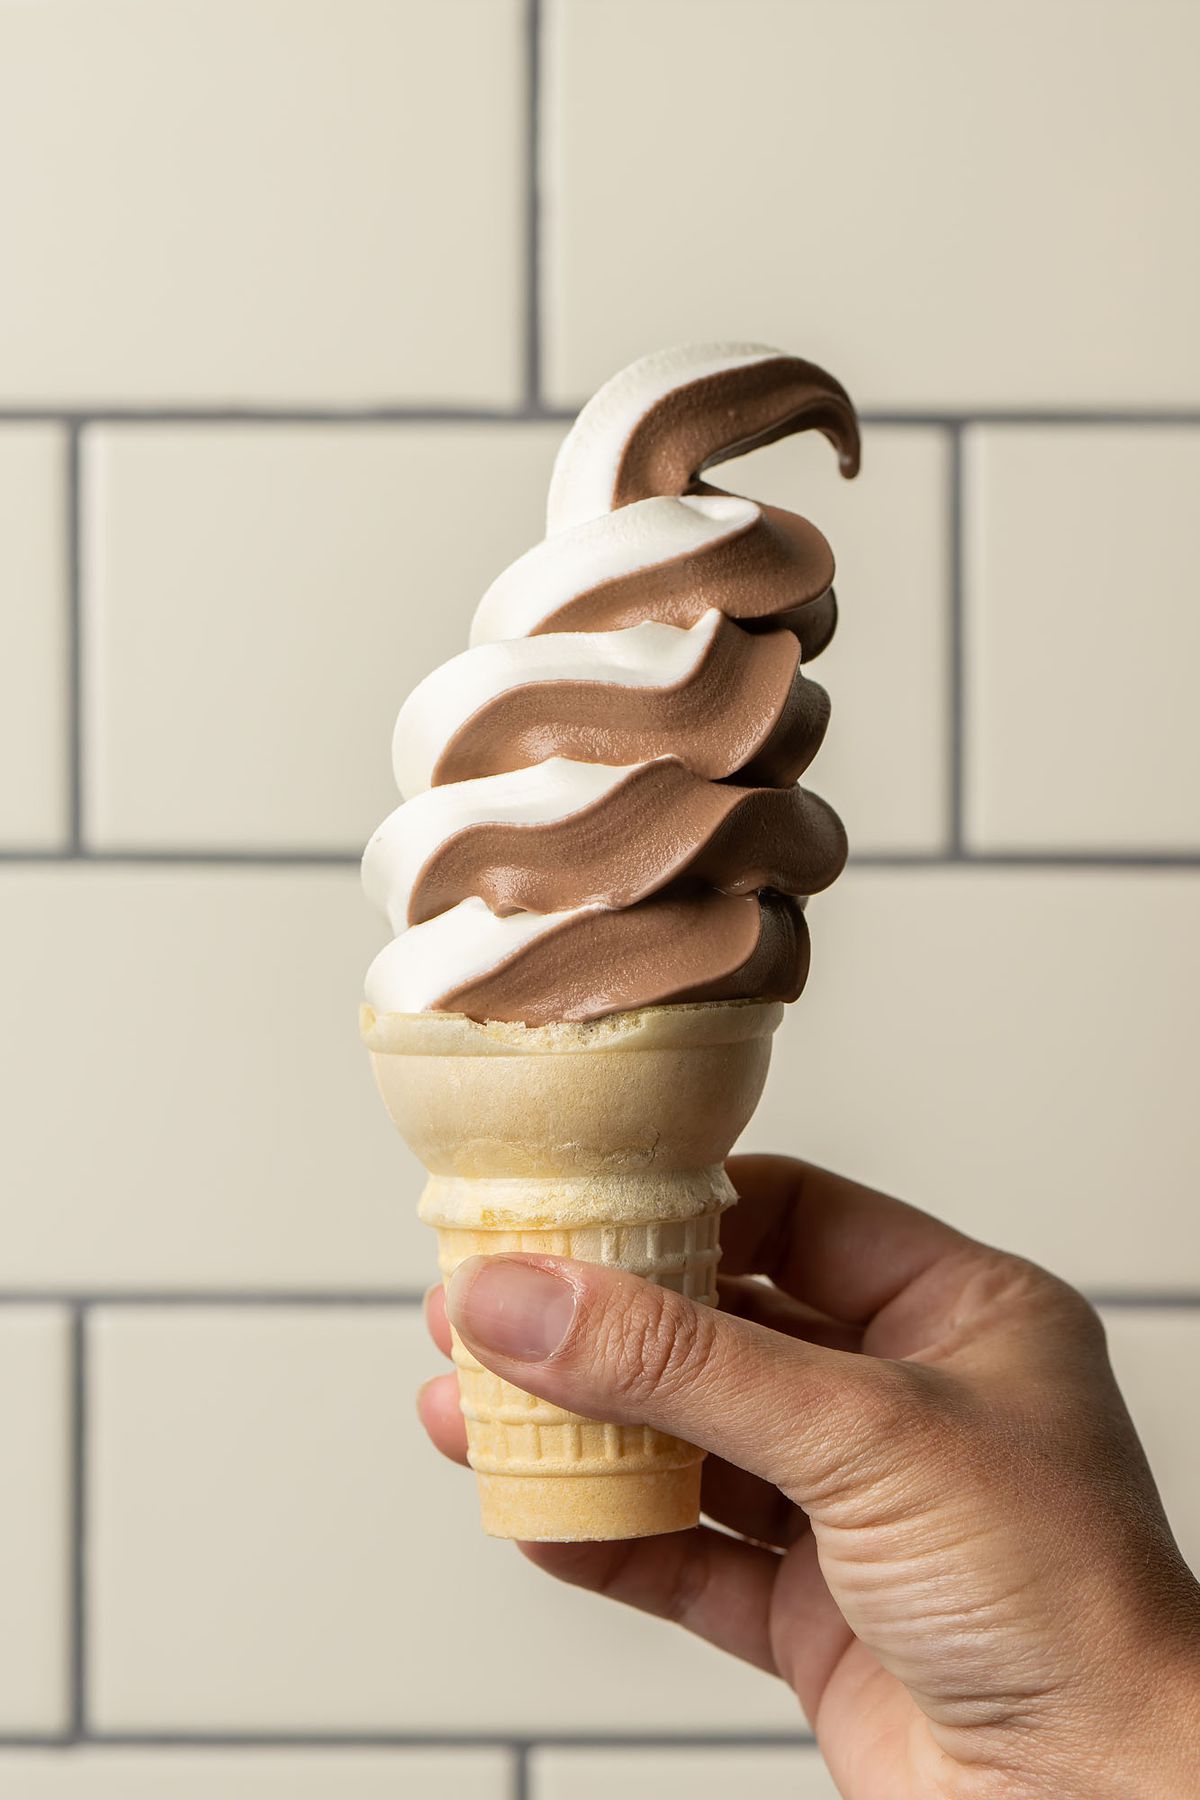 A hand holds up swirled soft serve against a tile background.